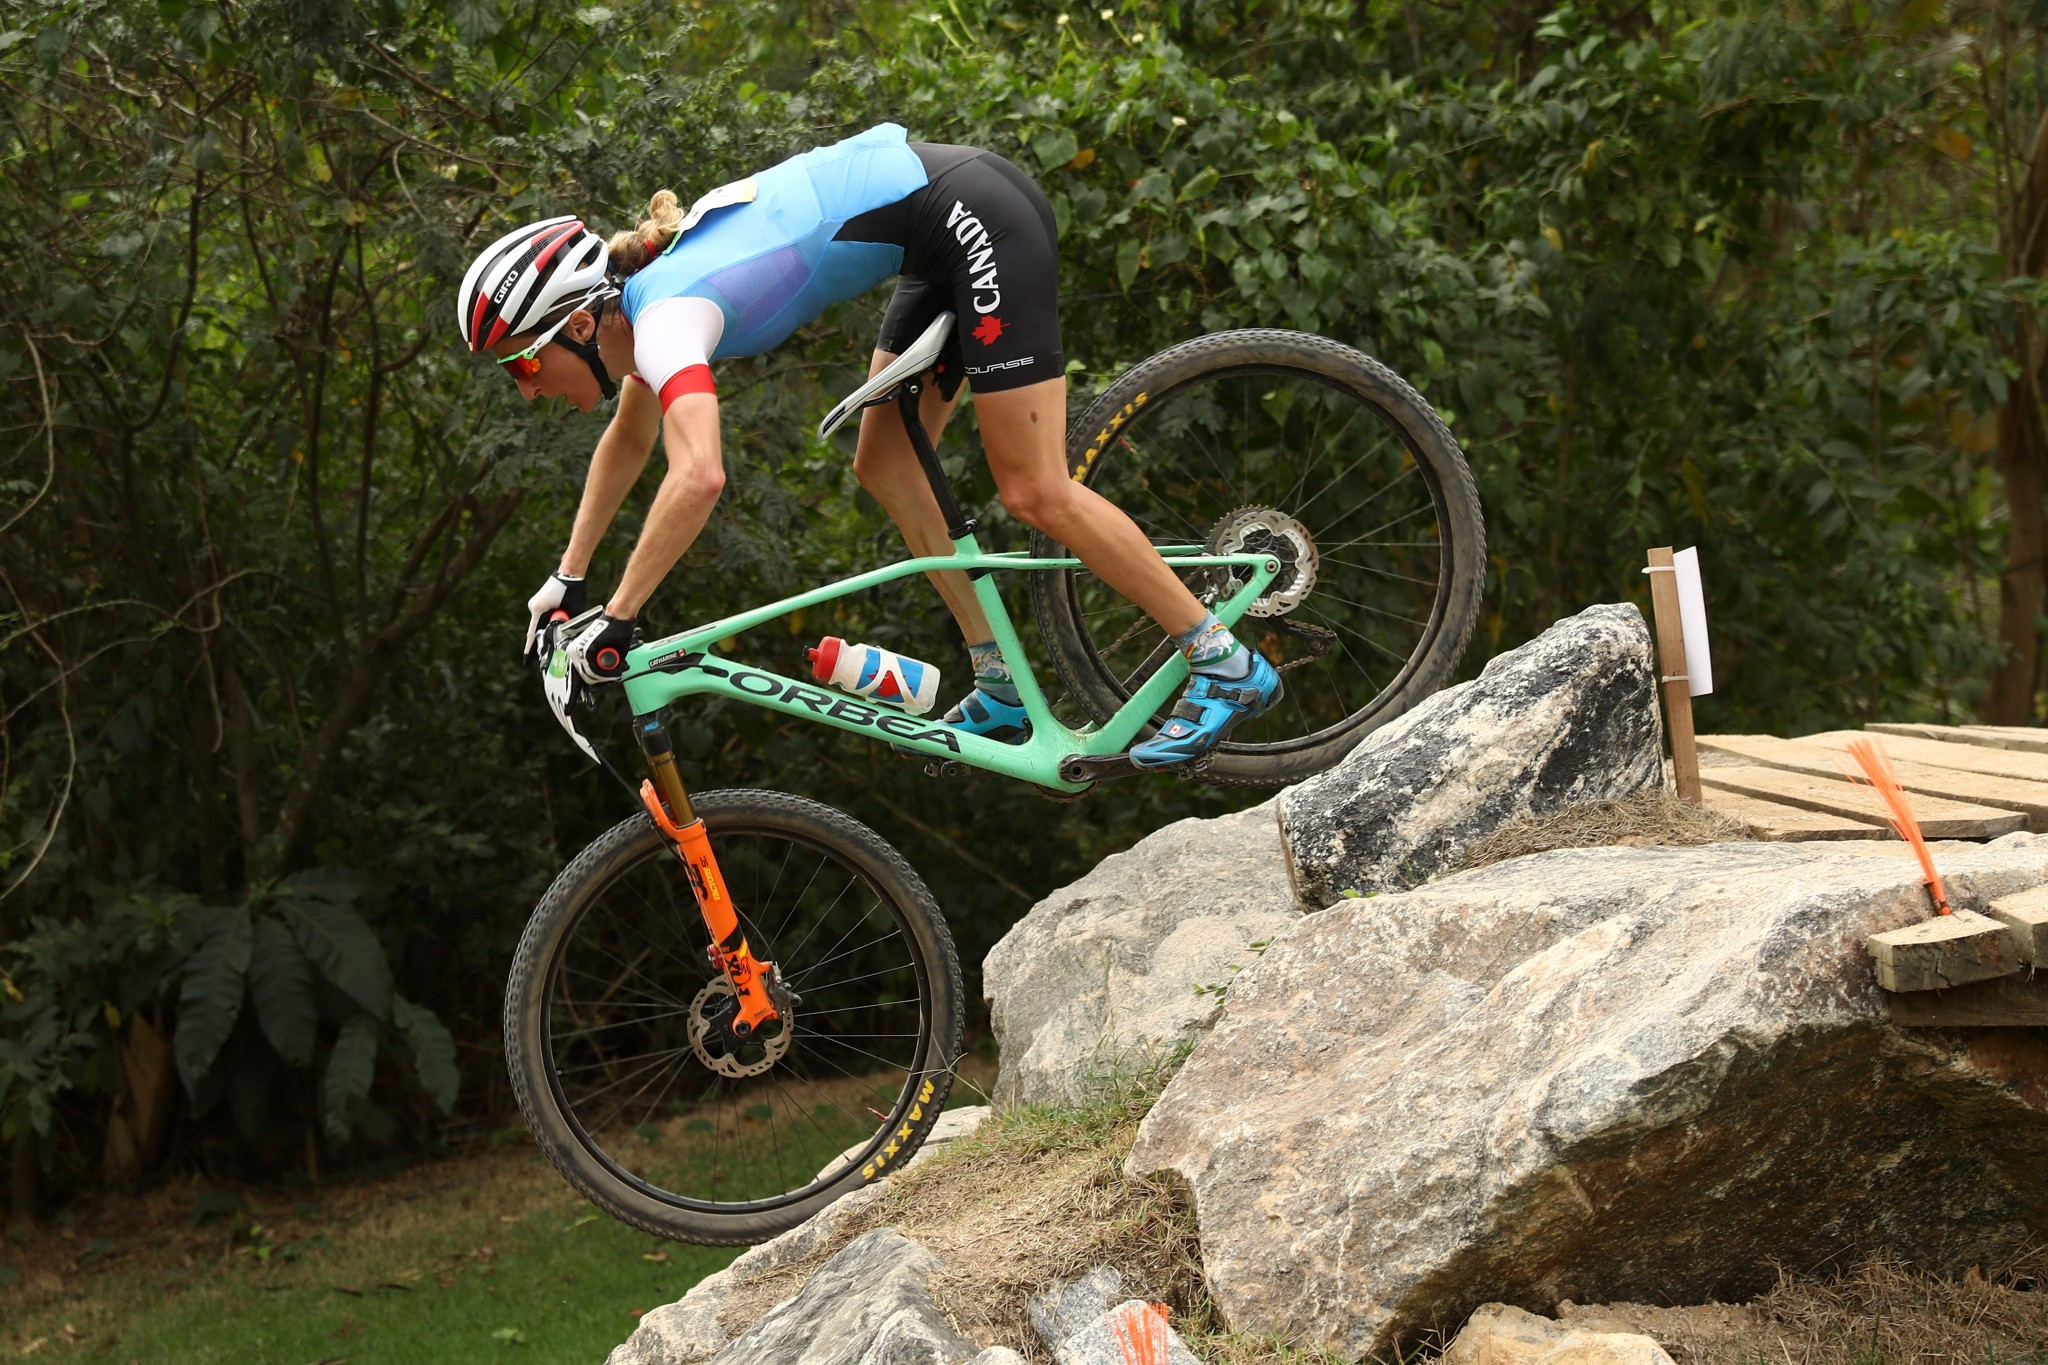 Pendrel hoping for repeat win at home Mountain Bike World Cup leg